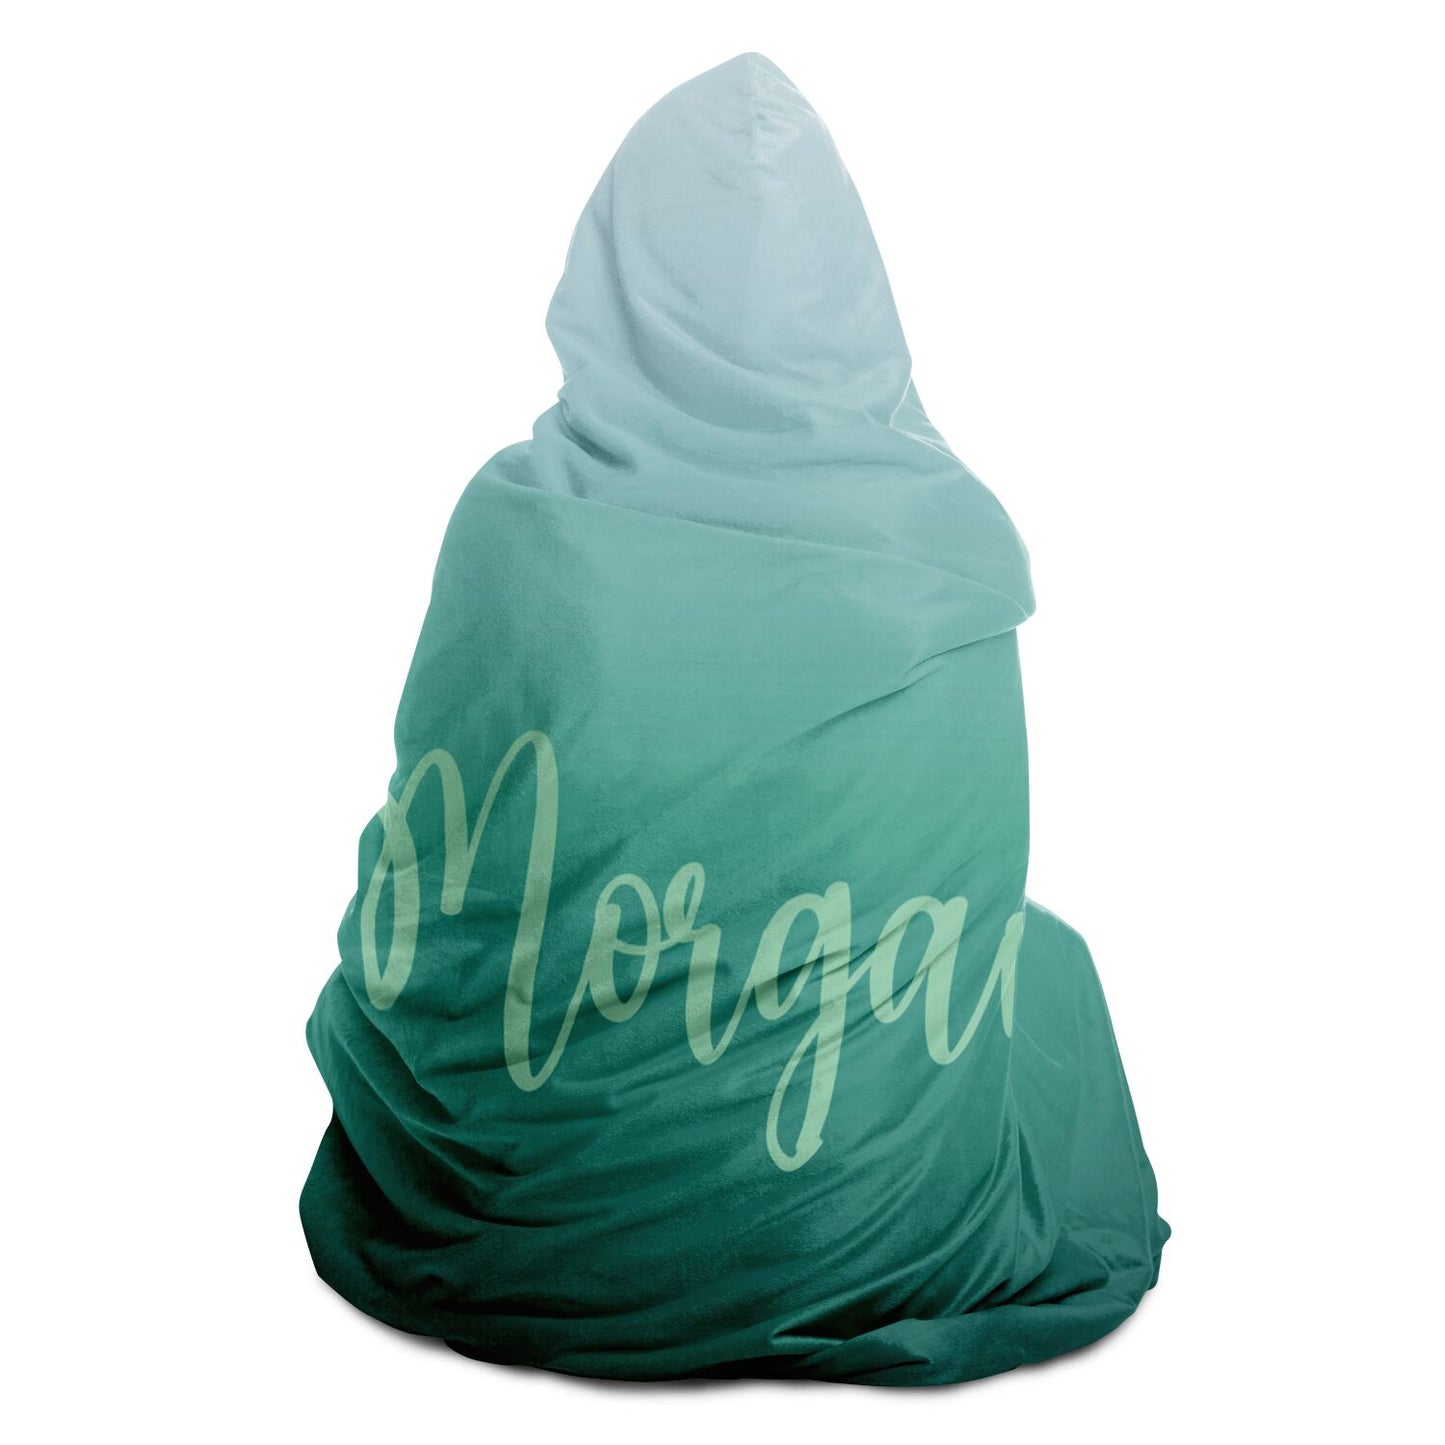 Personalized Hooded Blanket / Green Fade Blanket